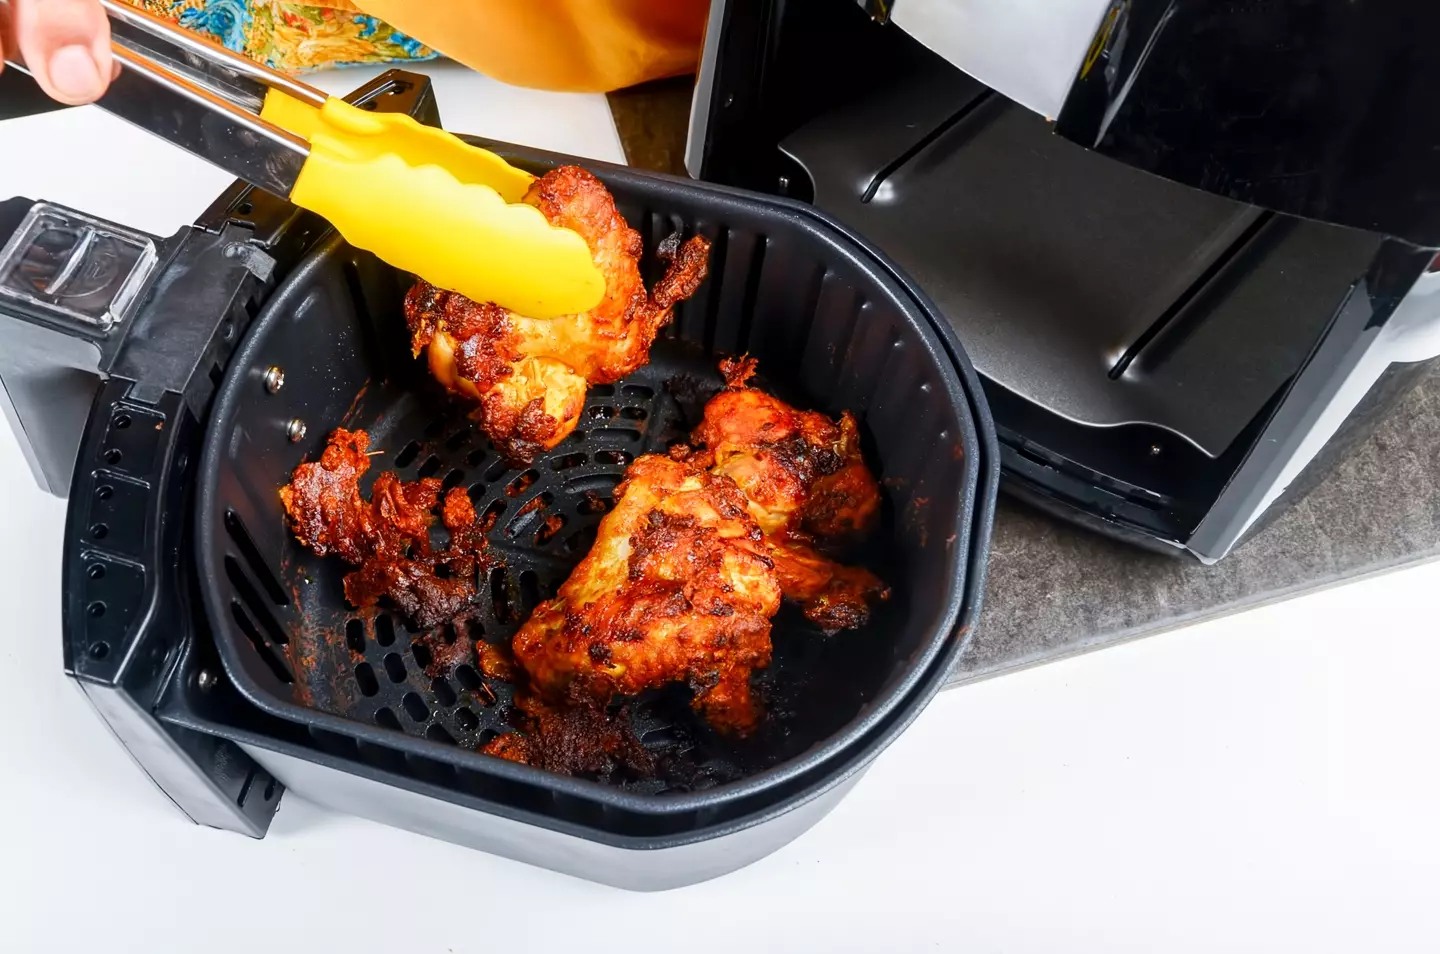 Chicken being cooked in an air fryer. Getty Stock Images